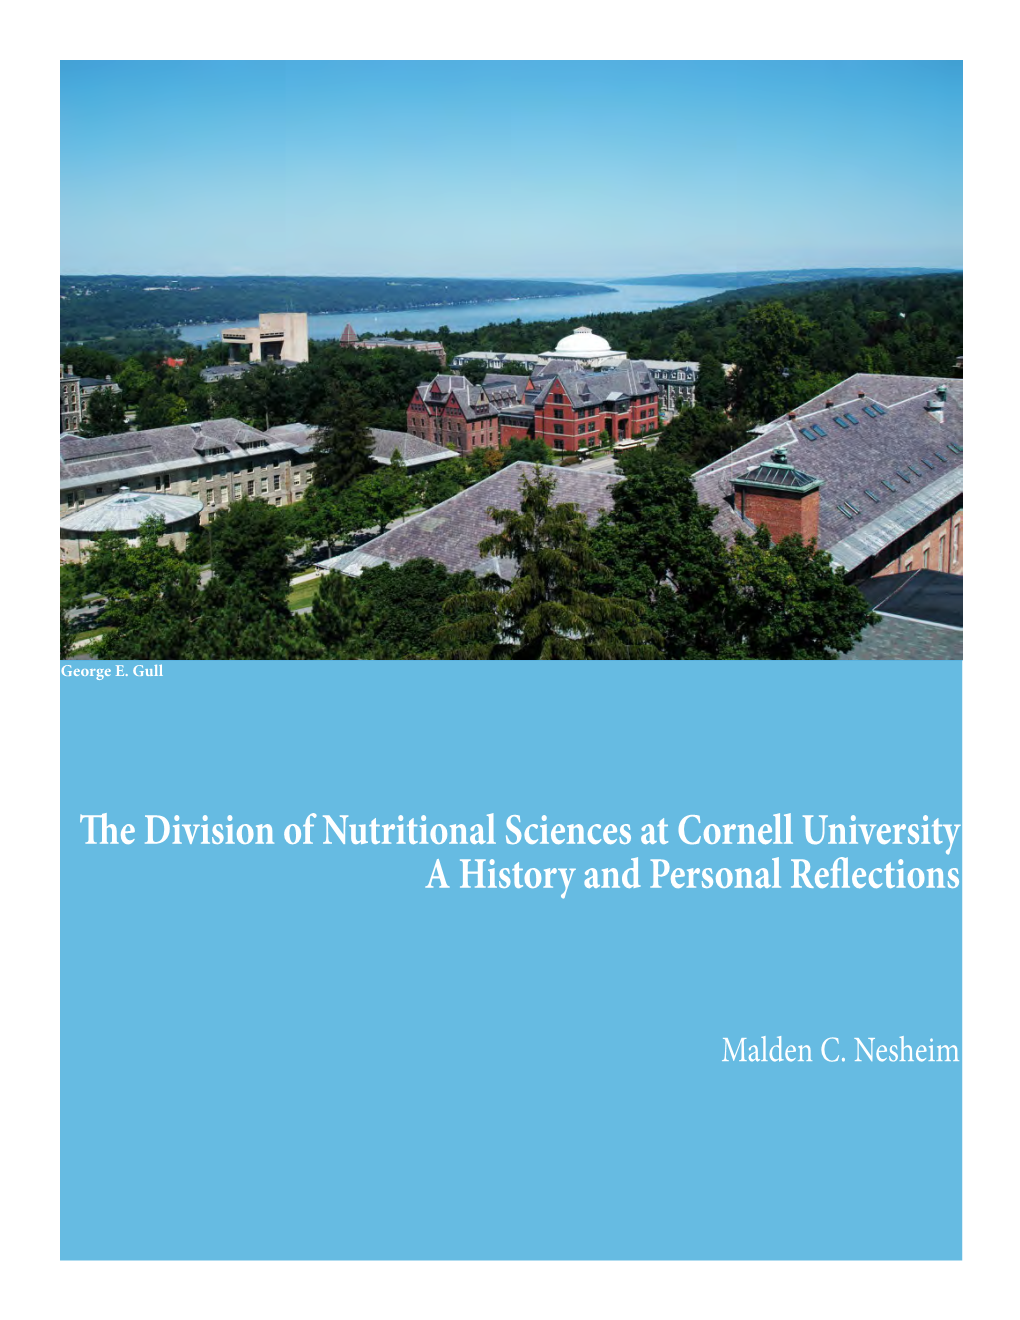 The Division of Nutritional Sciences at Cornell University a History and Personal Reflections